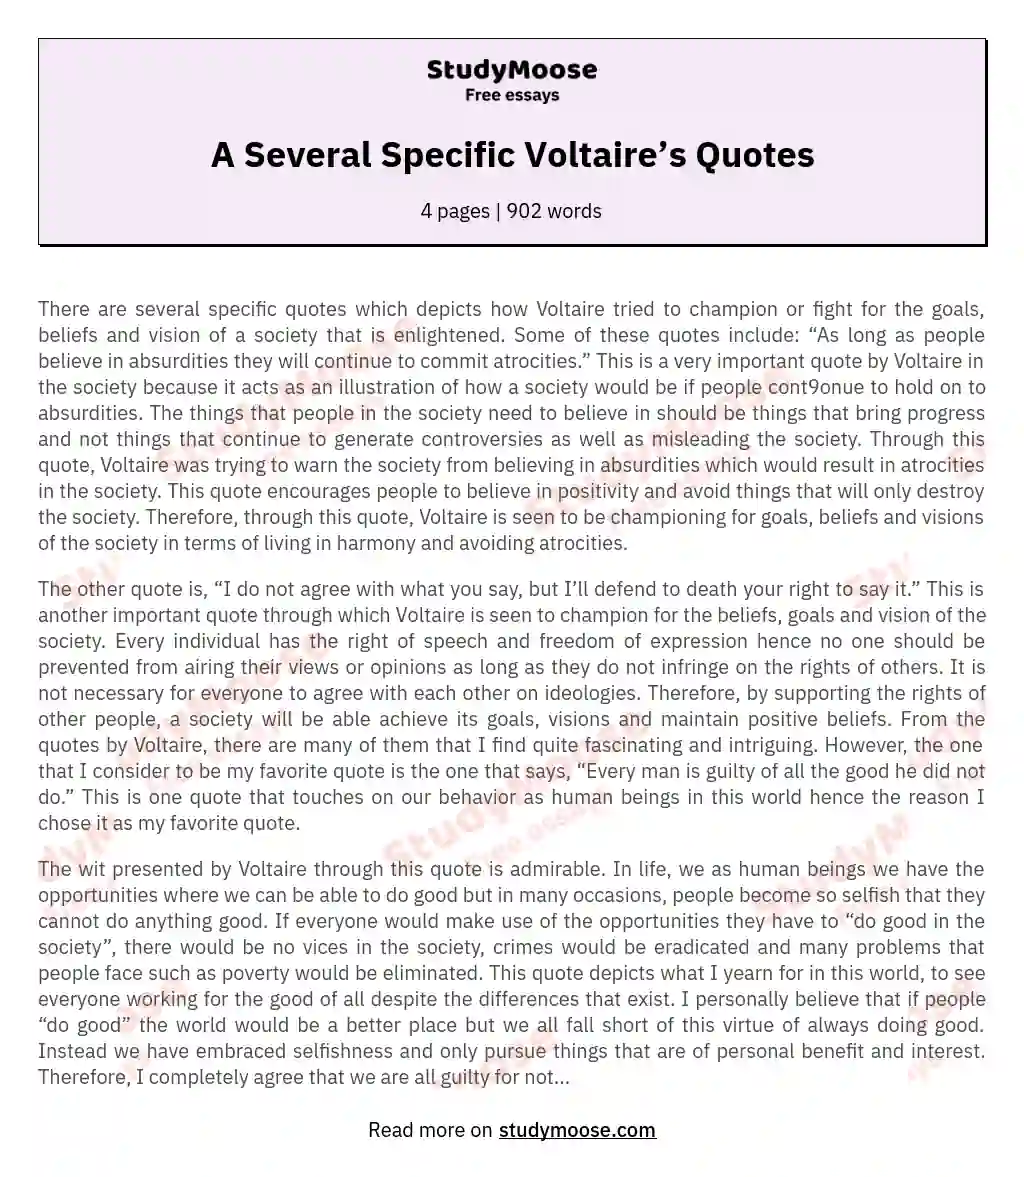 A Several Specific Voltaire’s Quotes